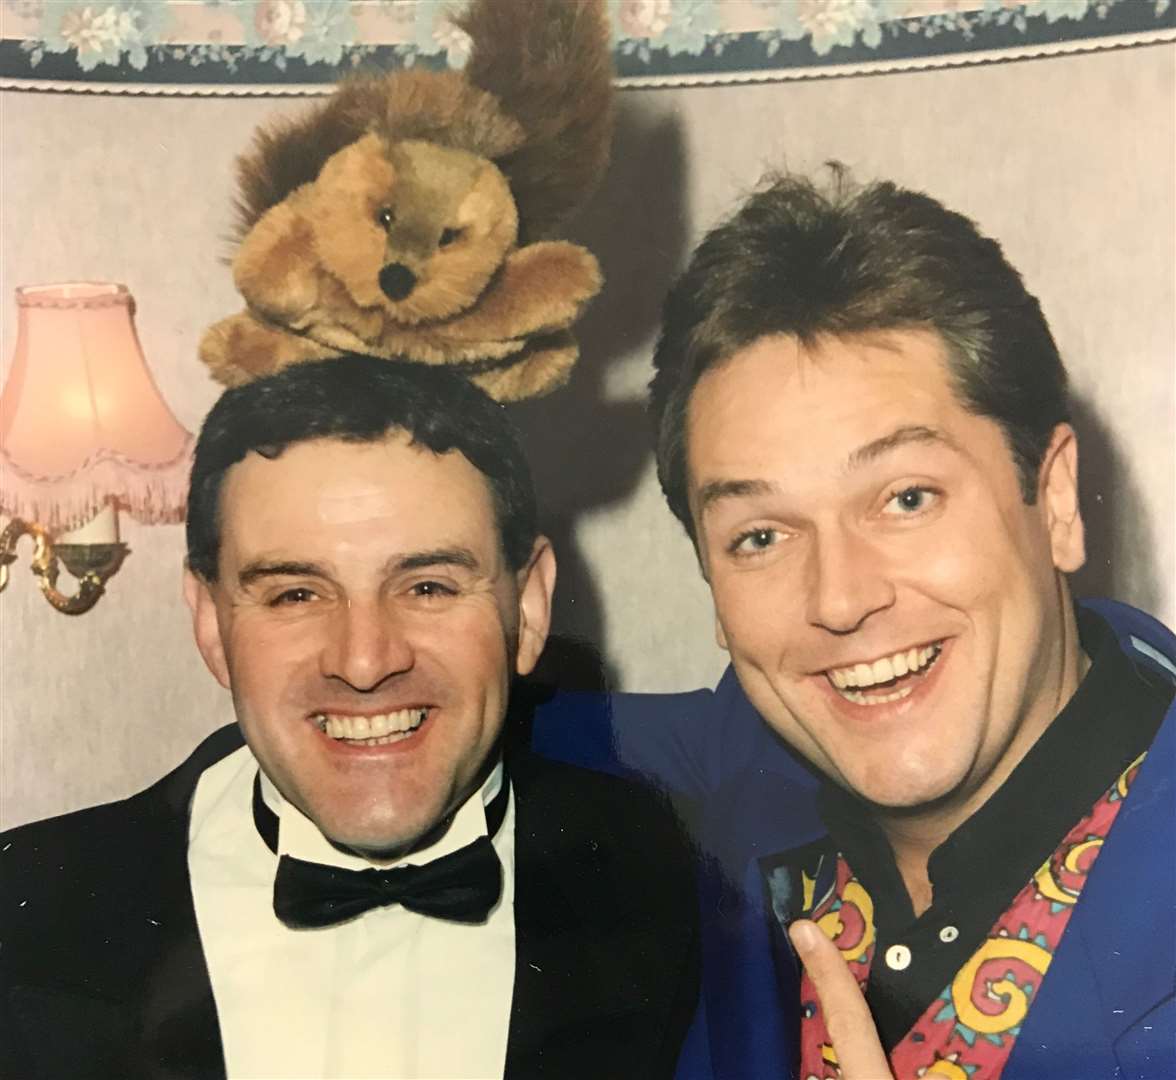 Ray photographed with Brian Conley